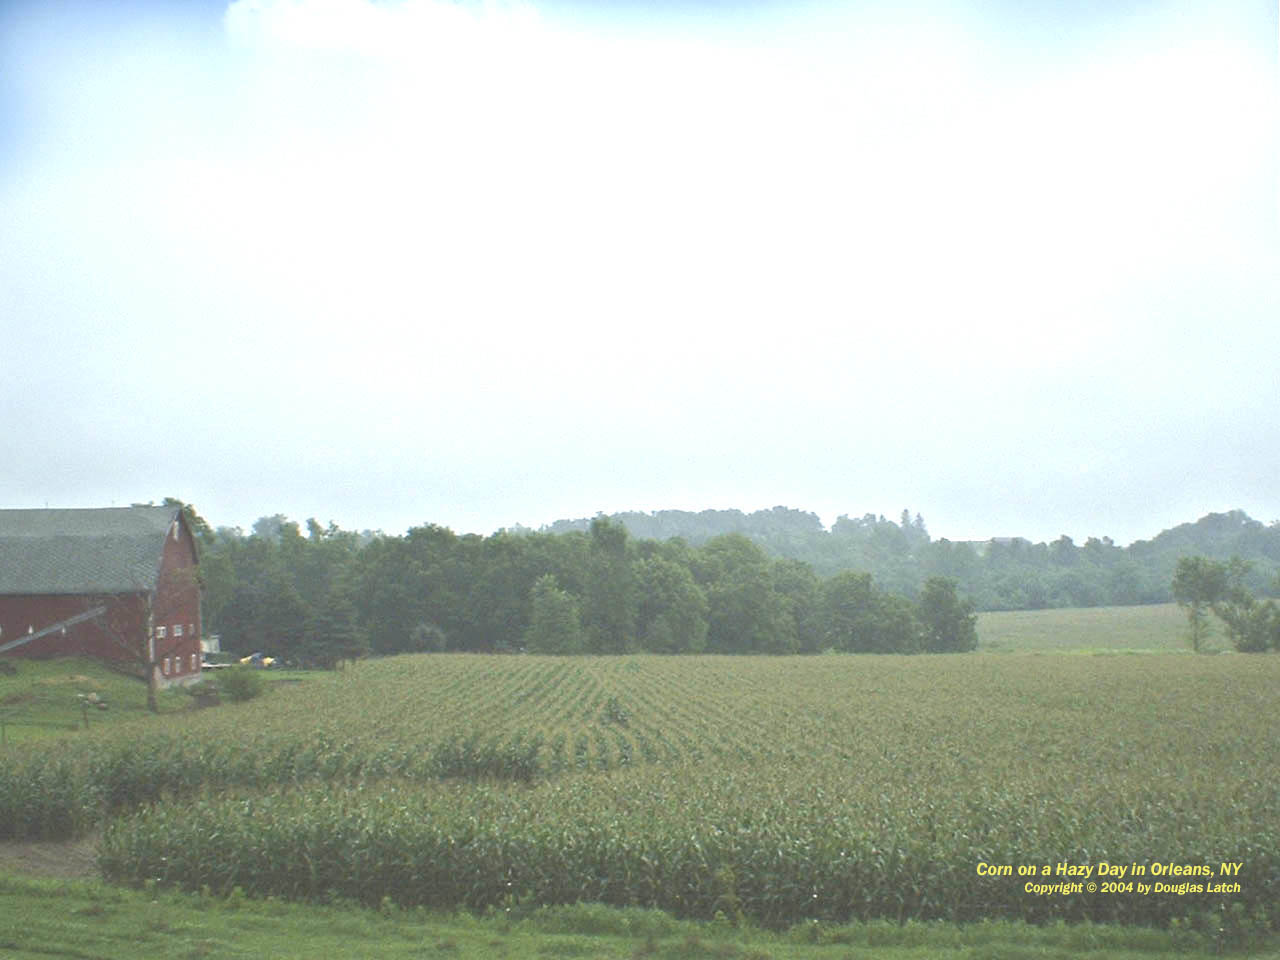 The Corn Is Ready To Pick In Orleans